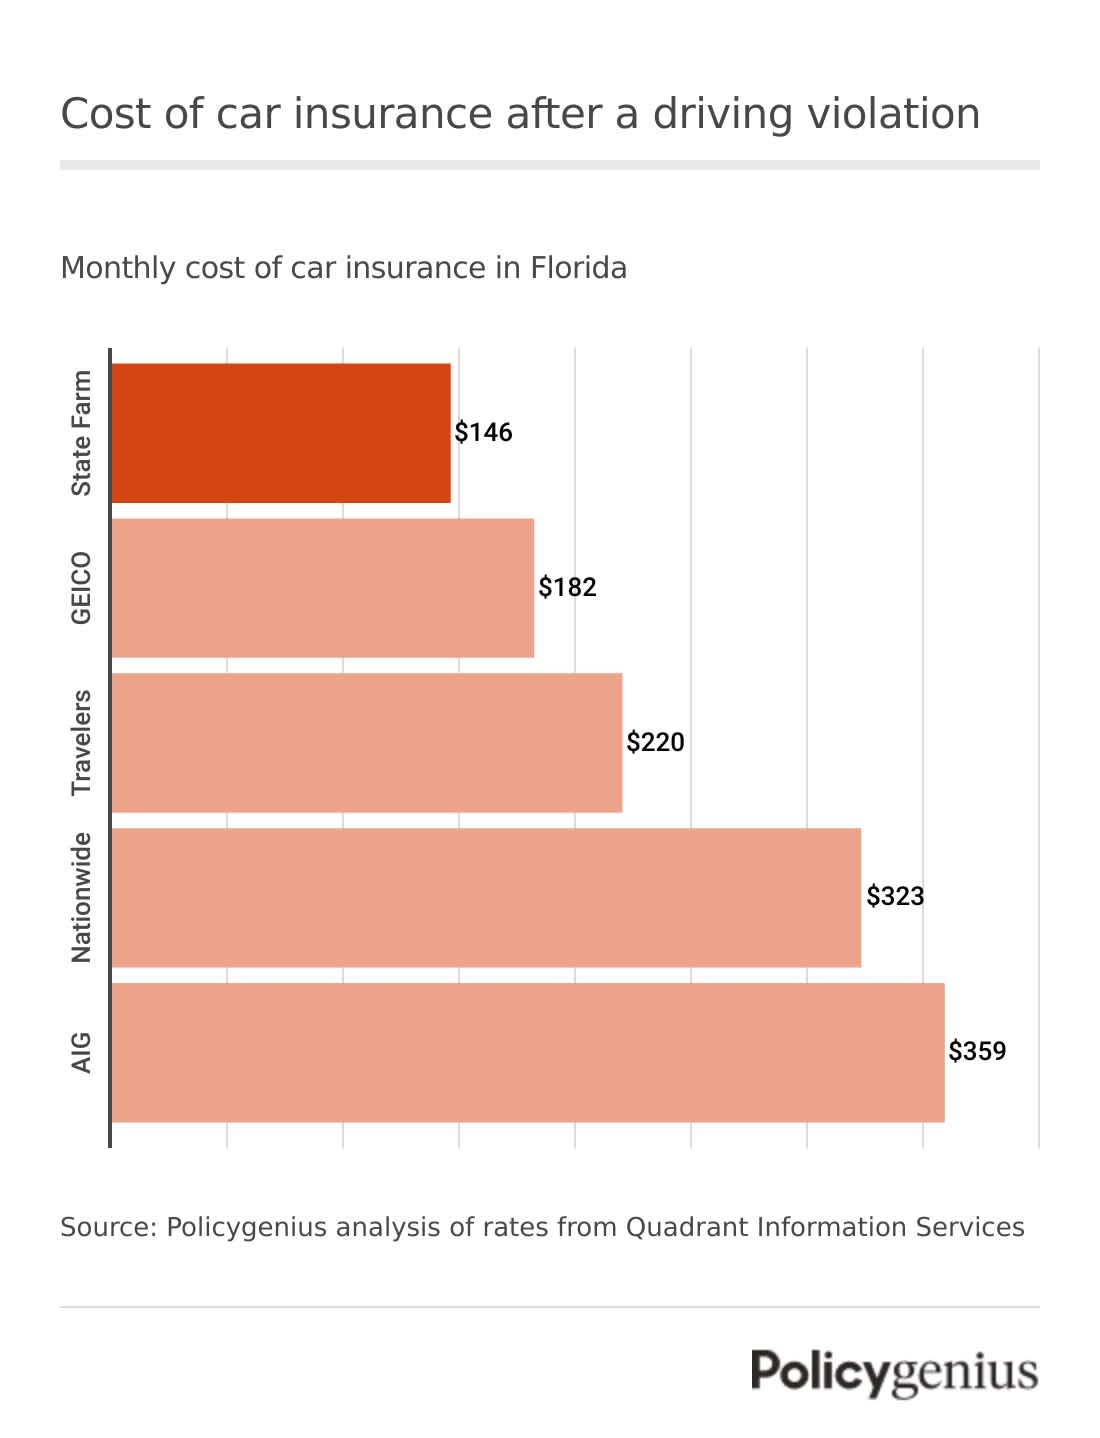 A bar graph showing the cheapest companies for car insurance in Florida.